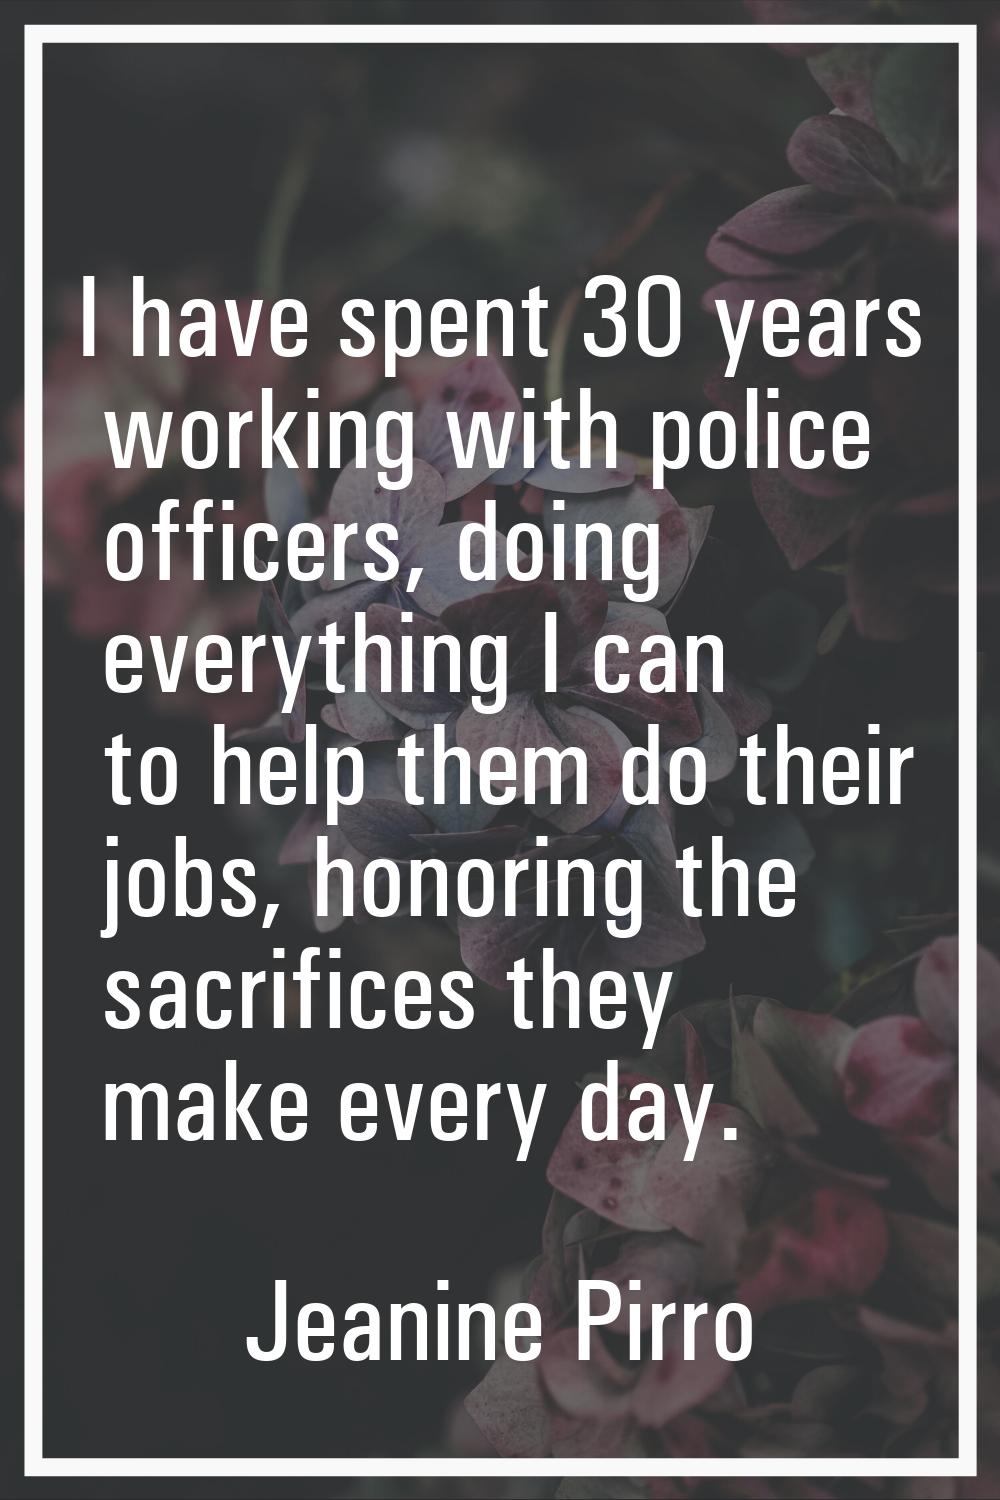 I have spent 30 years working with police officers, doing everything I can to help them do their jo